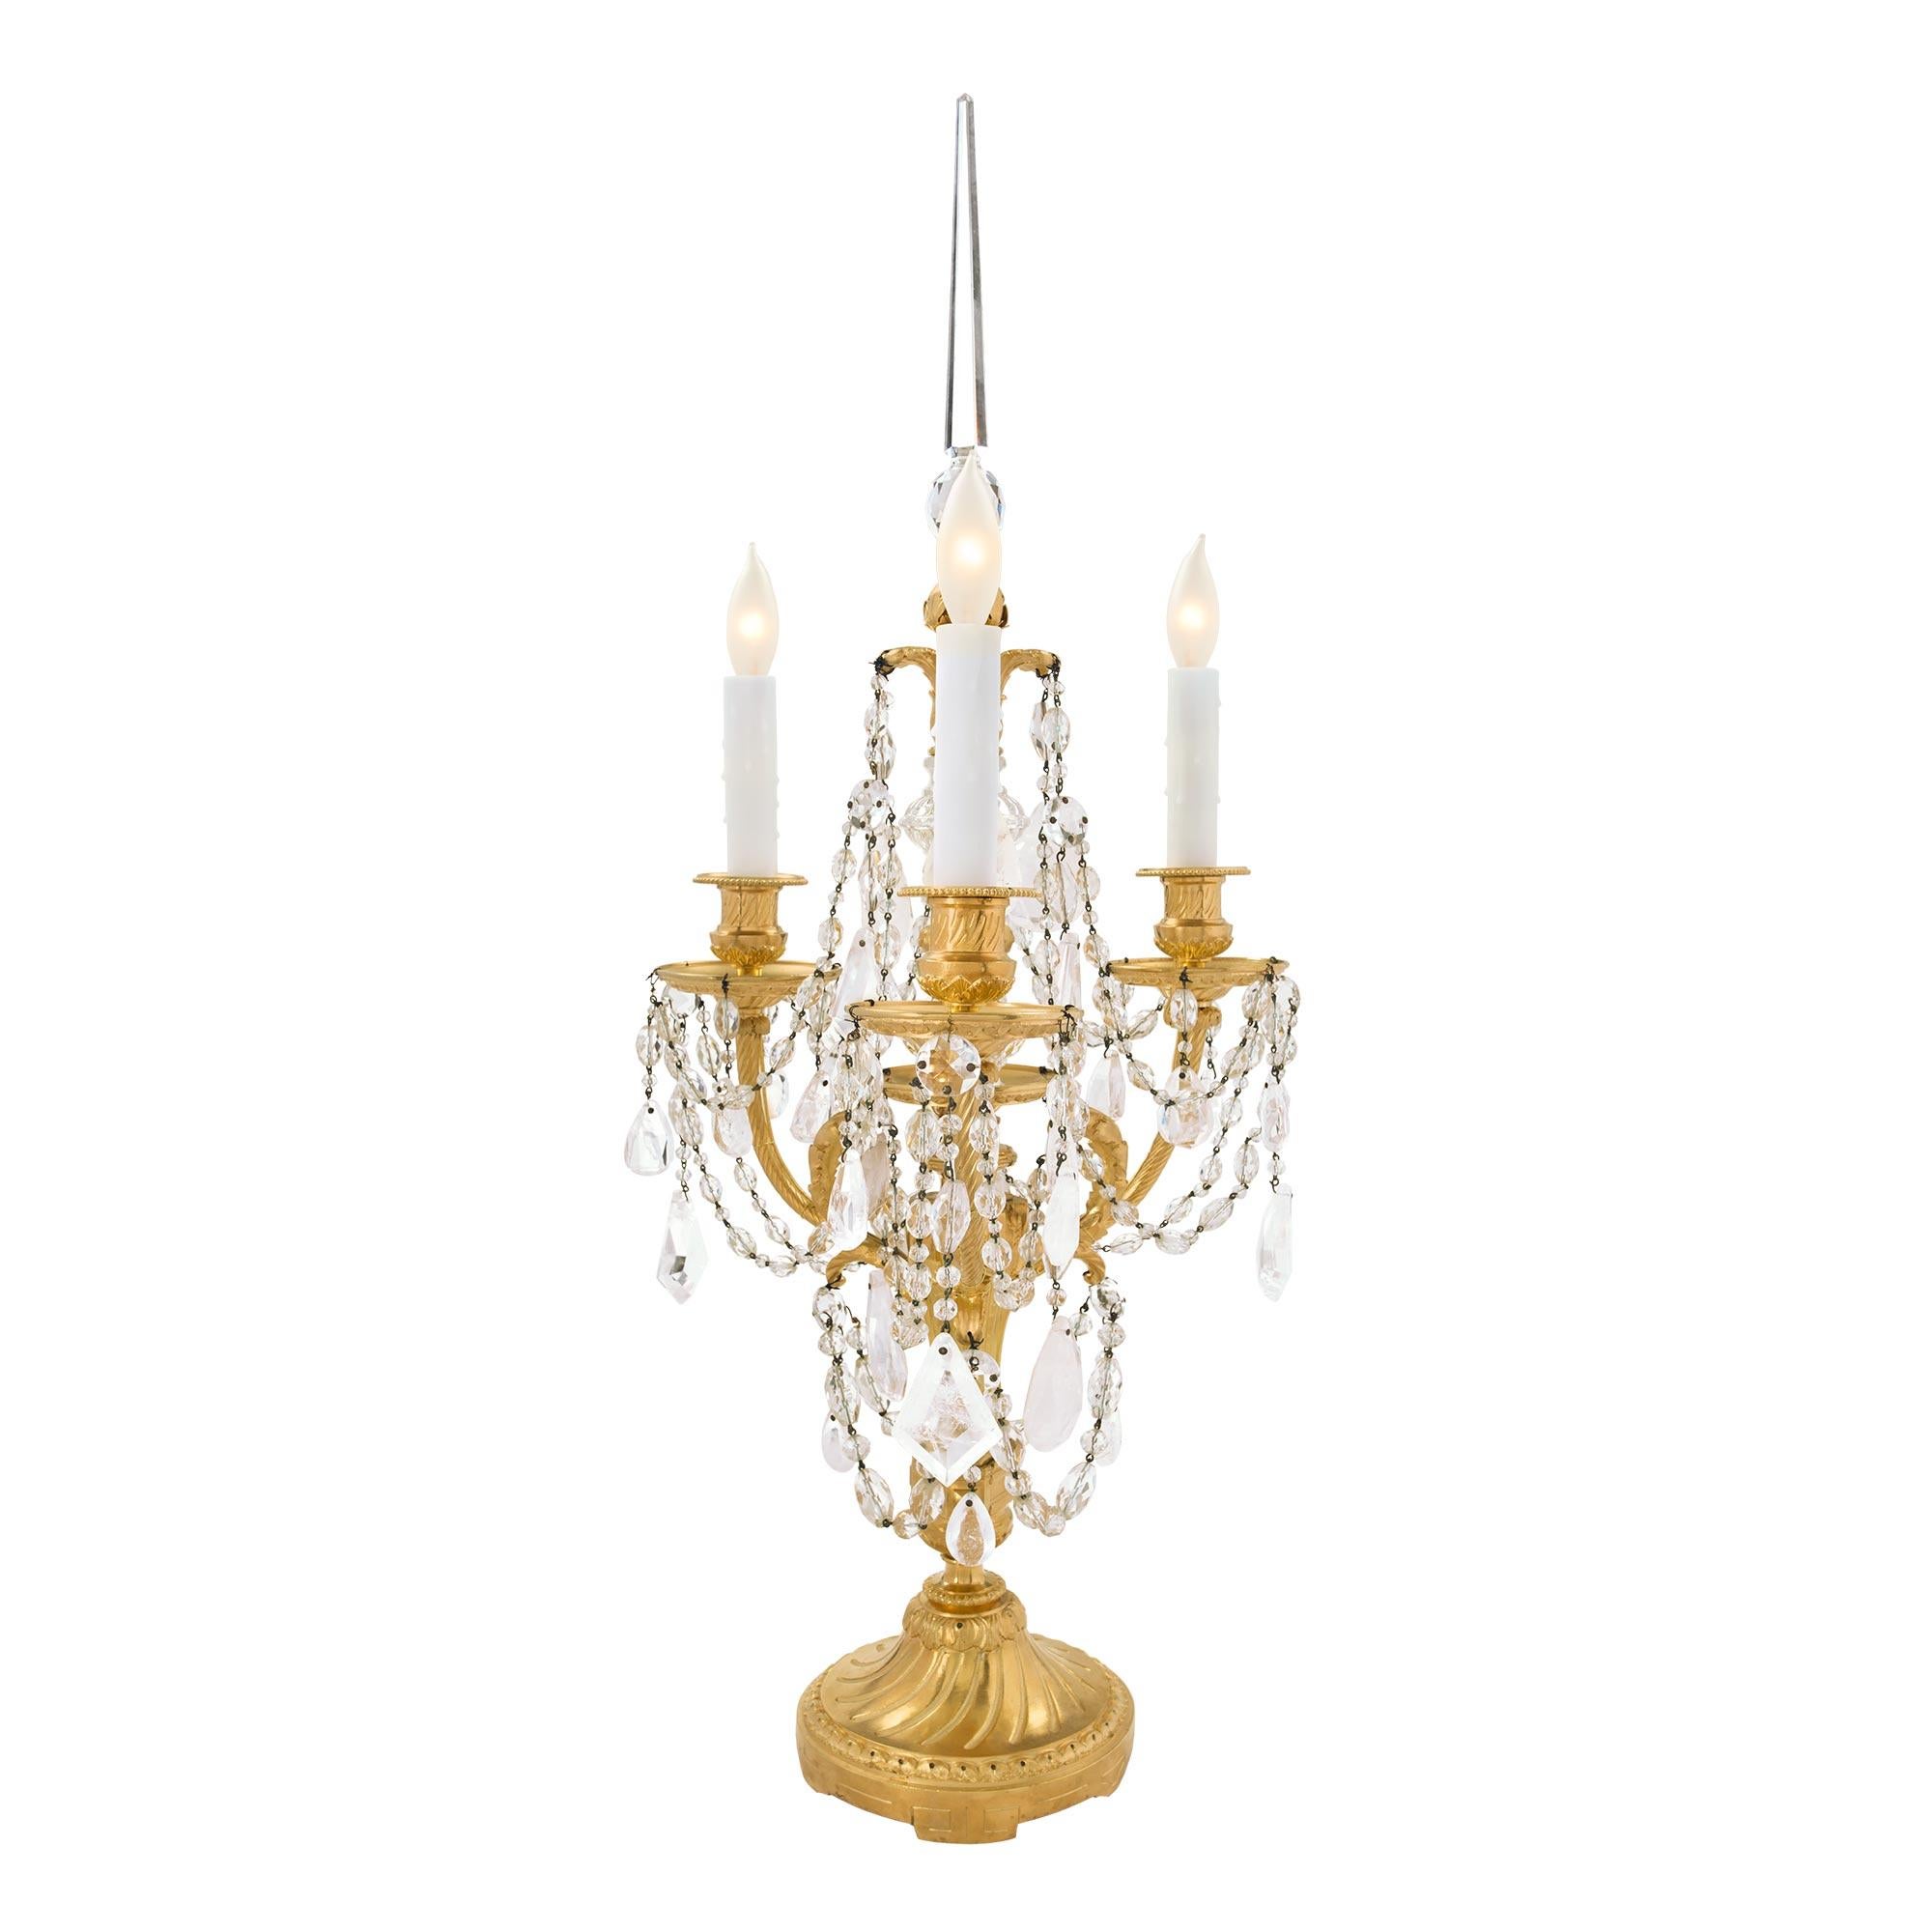 An elegant pair of French 19th century Louis XVI st. ormolu, Baccarat crystal and rock crystal three arm Girandoles lamps. Each lamp is raised by a circular base with a fine wrap around foliate band and a spiral fluted design in a rich satin and